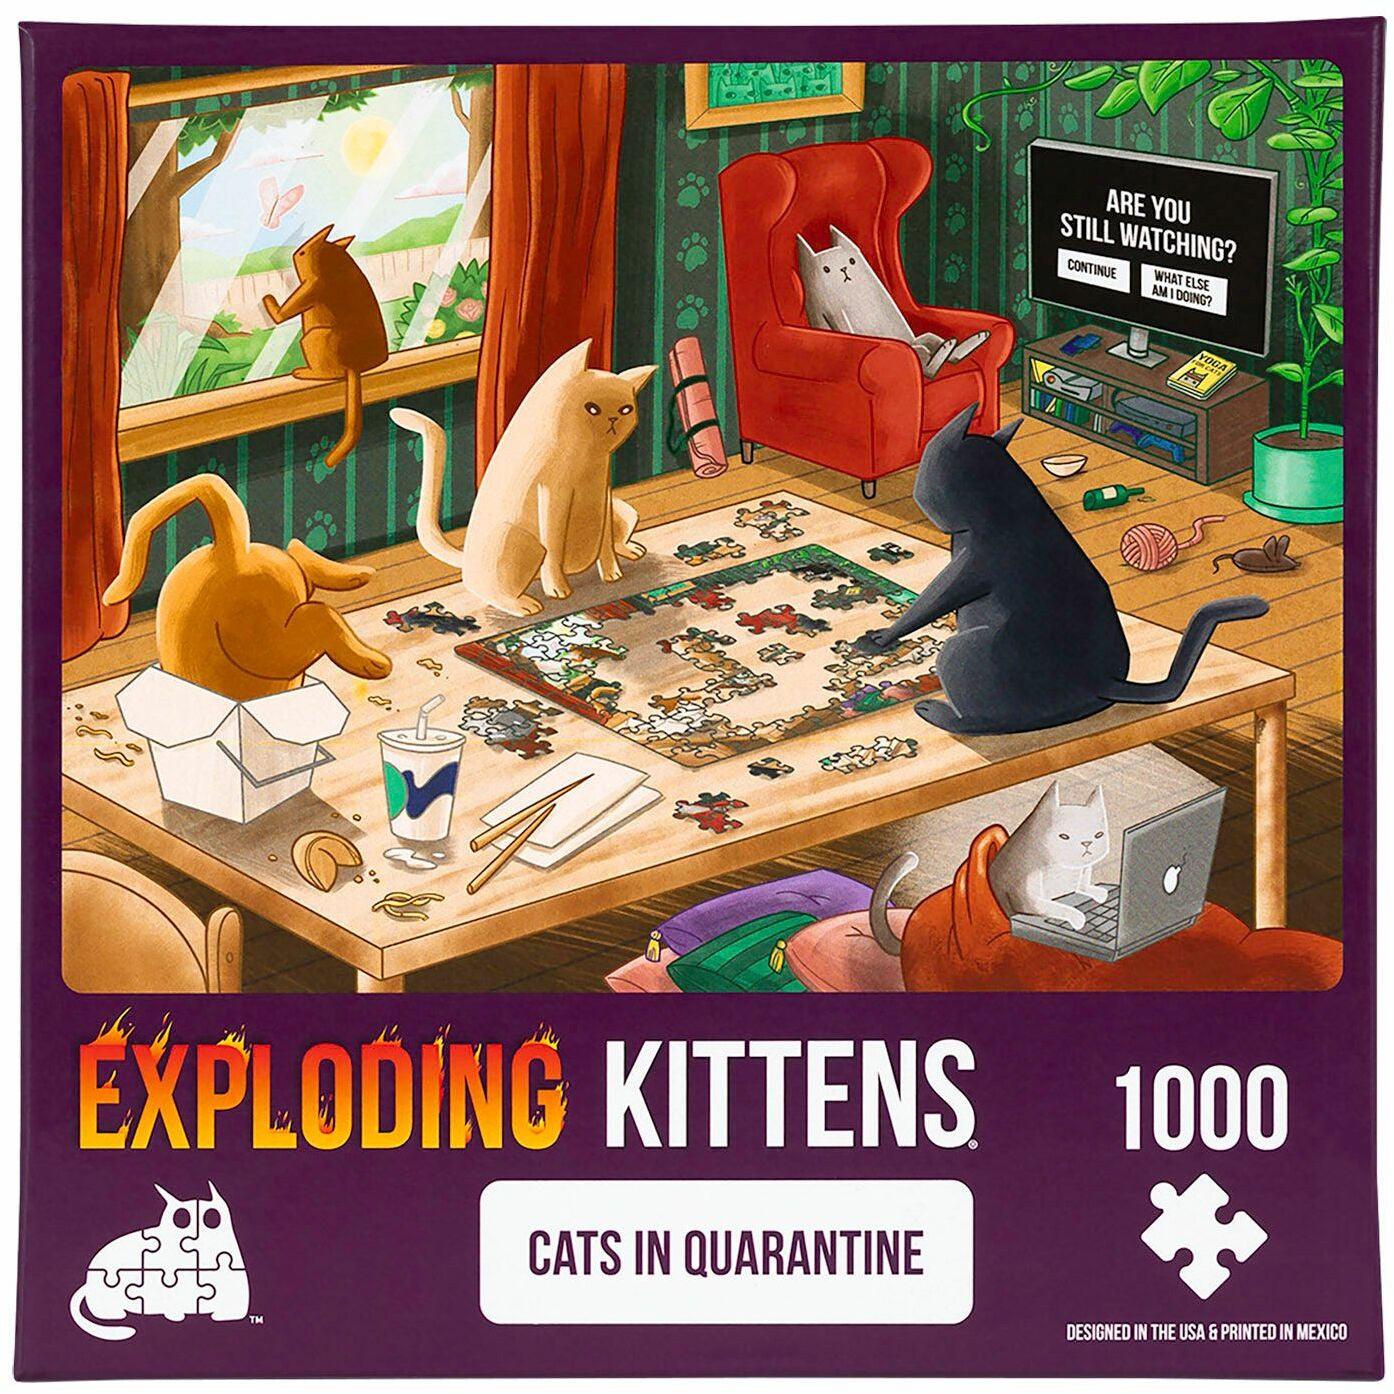 VR-101453 Exploding Kittens Puzzle Cats in Quarantine 1,000 pieces - Exploding Kittens - Titan Pop Culture